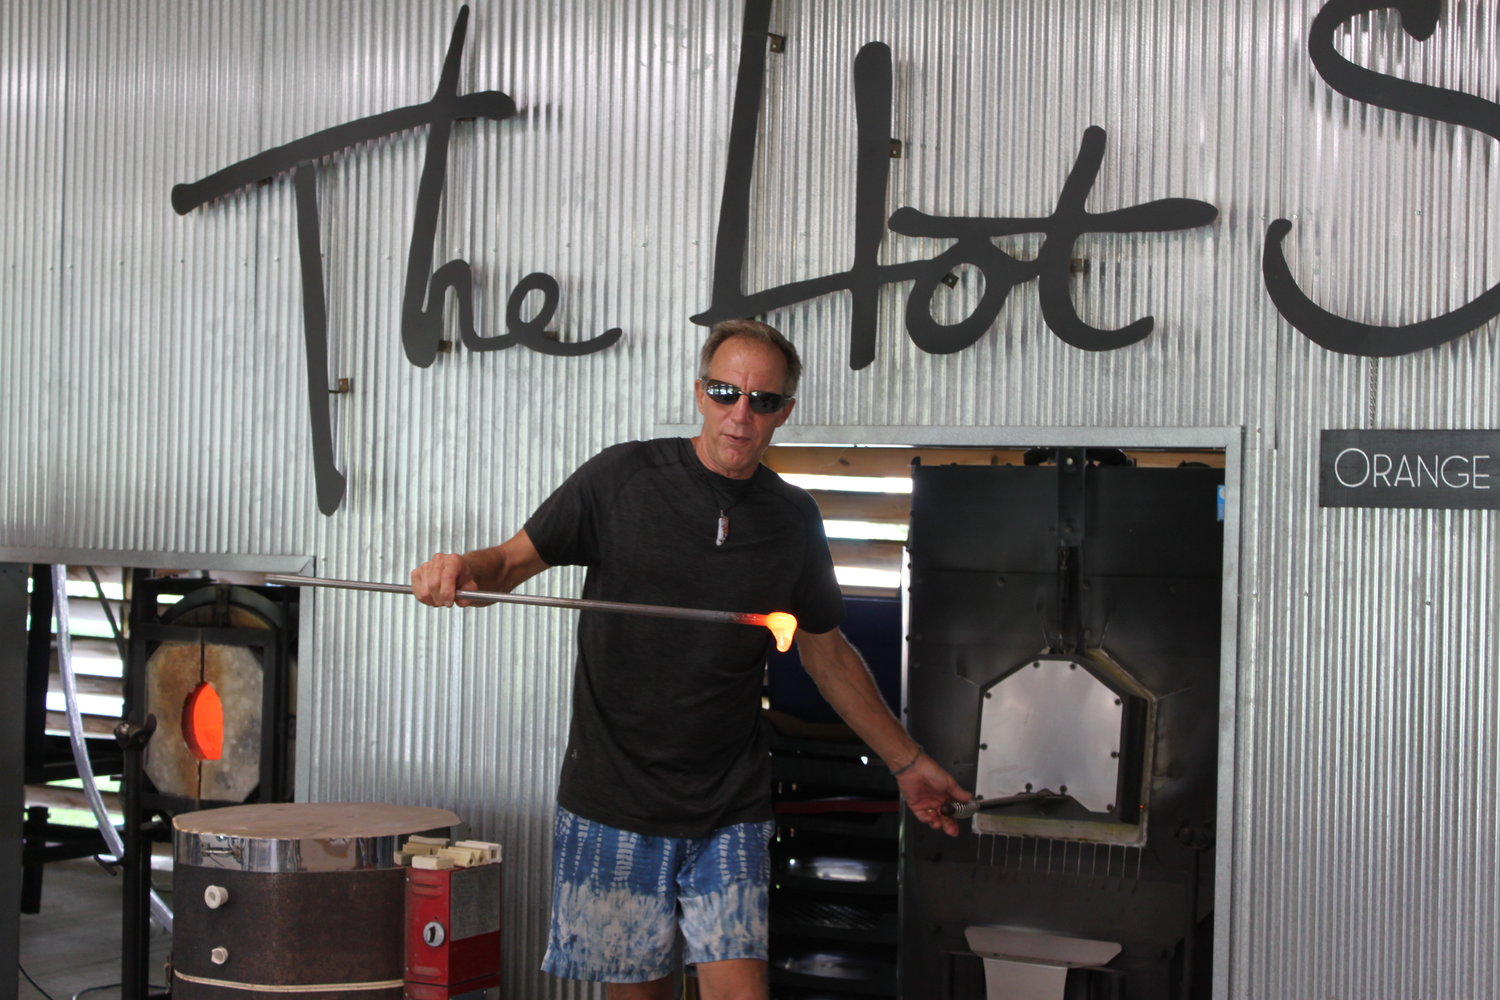 Bill Bollinger gathers molten glass from the furnace in The Hot Shop.